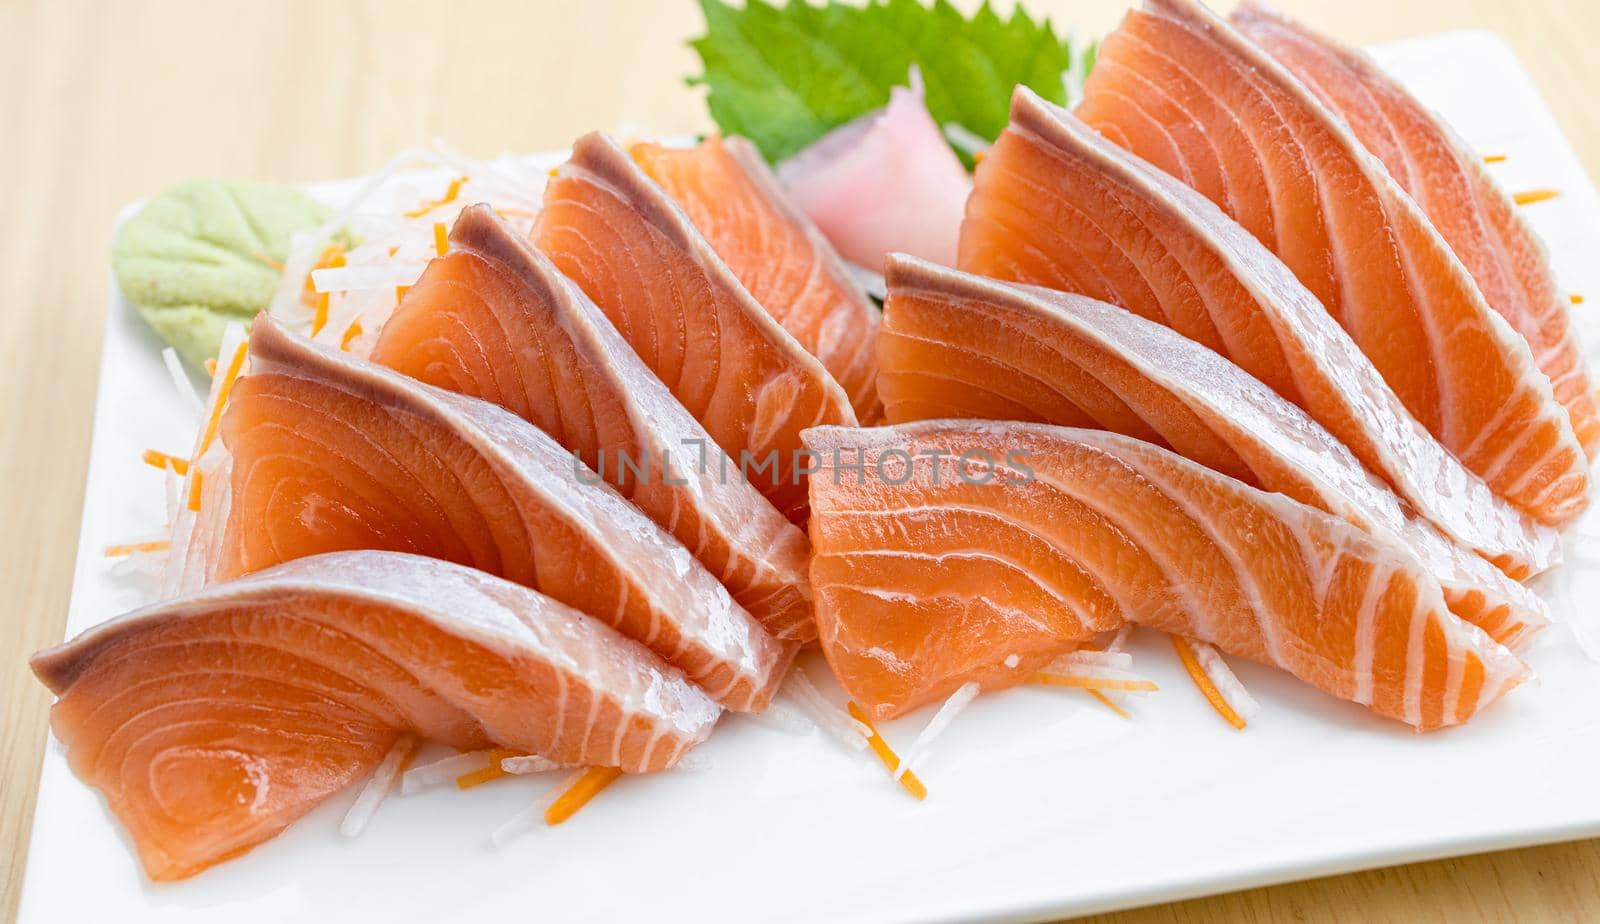 Salmon Sashimi on white background. Japan food concept by Buttus_casso